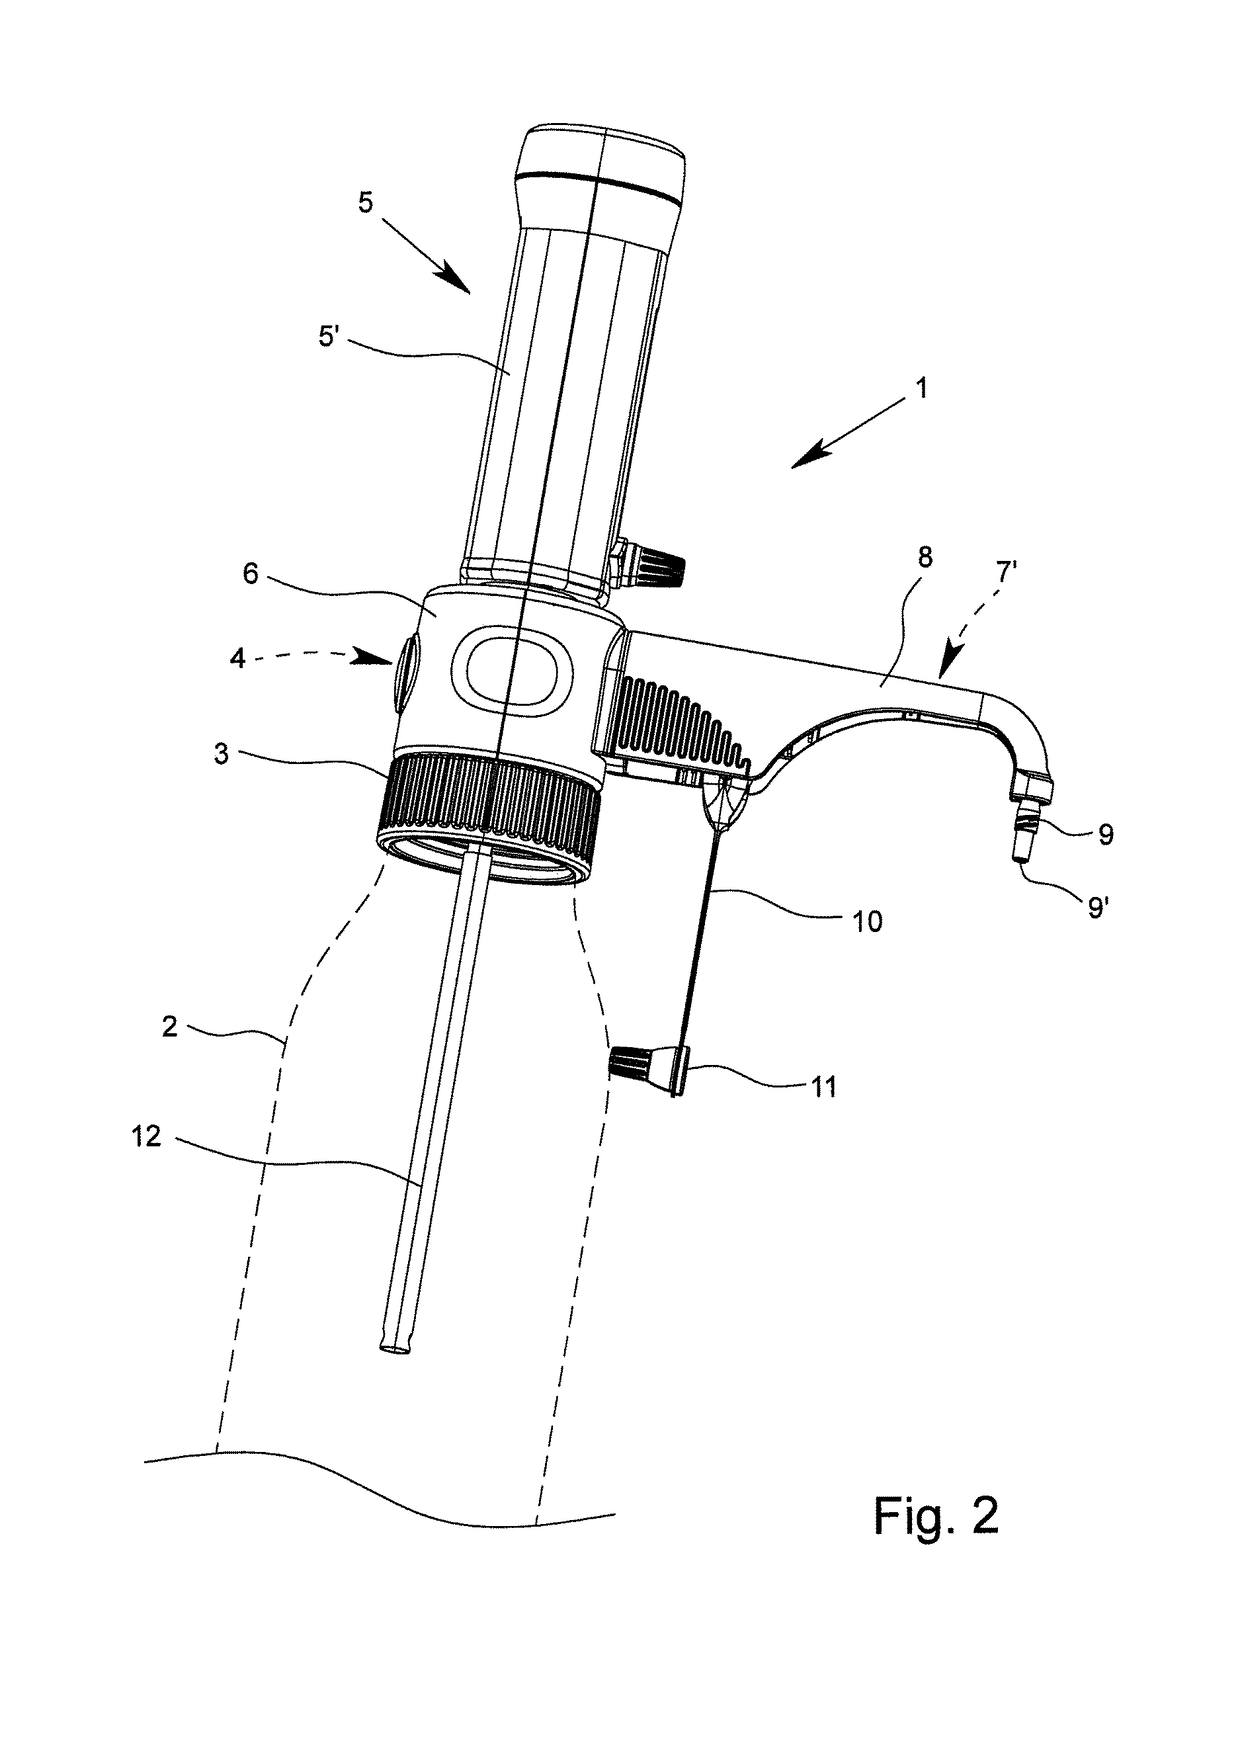 Exhaust line assembly for a bottle attachment apparatus